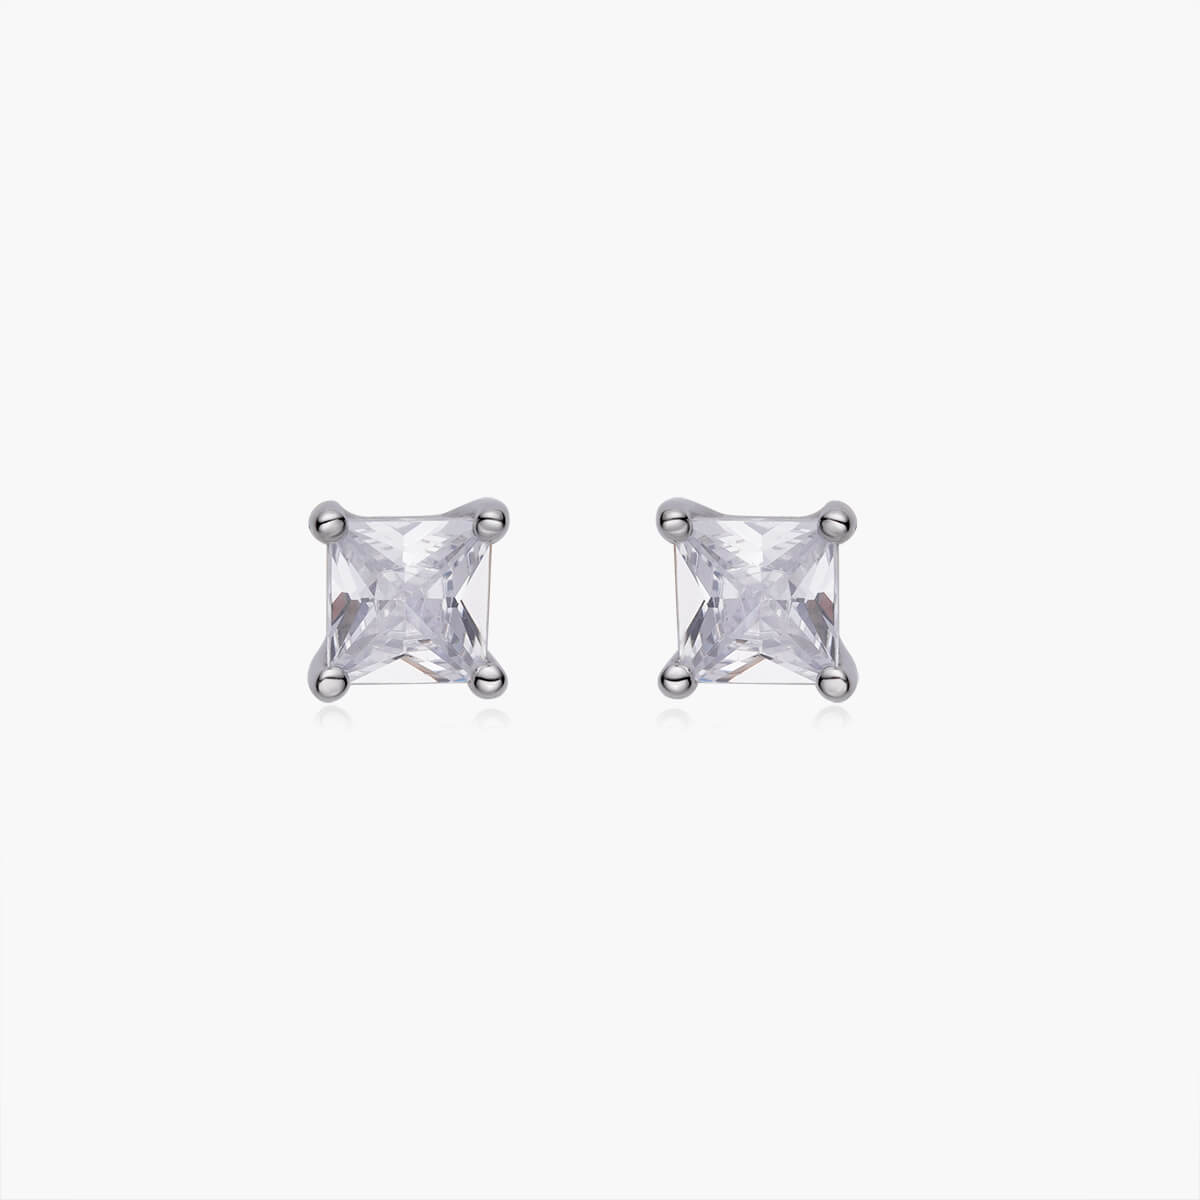 9ct White Gold Diamond Square Shape Stud Earrings | Angus & Coote